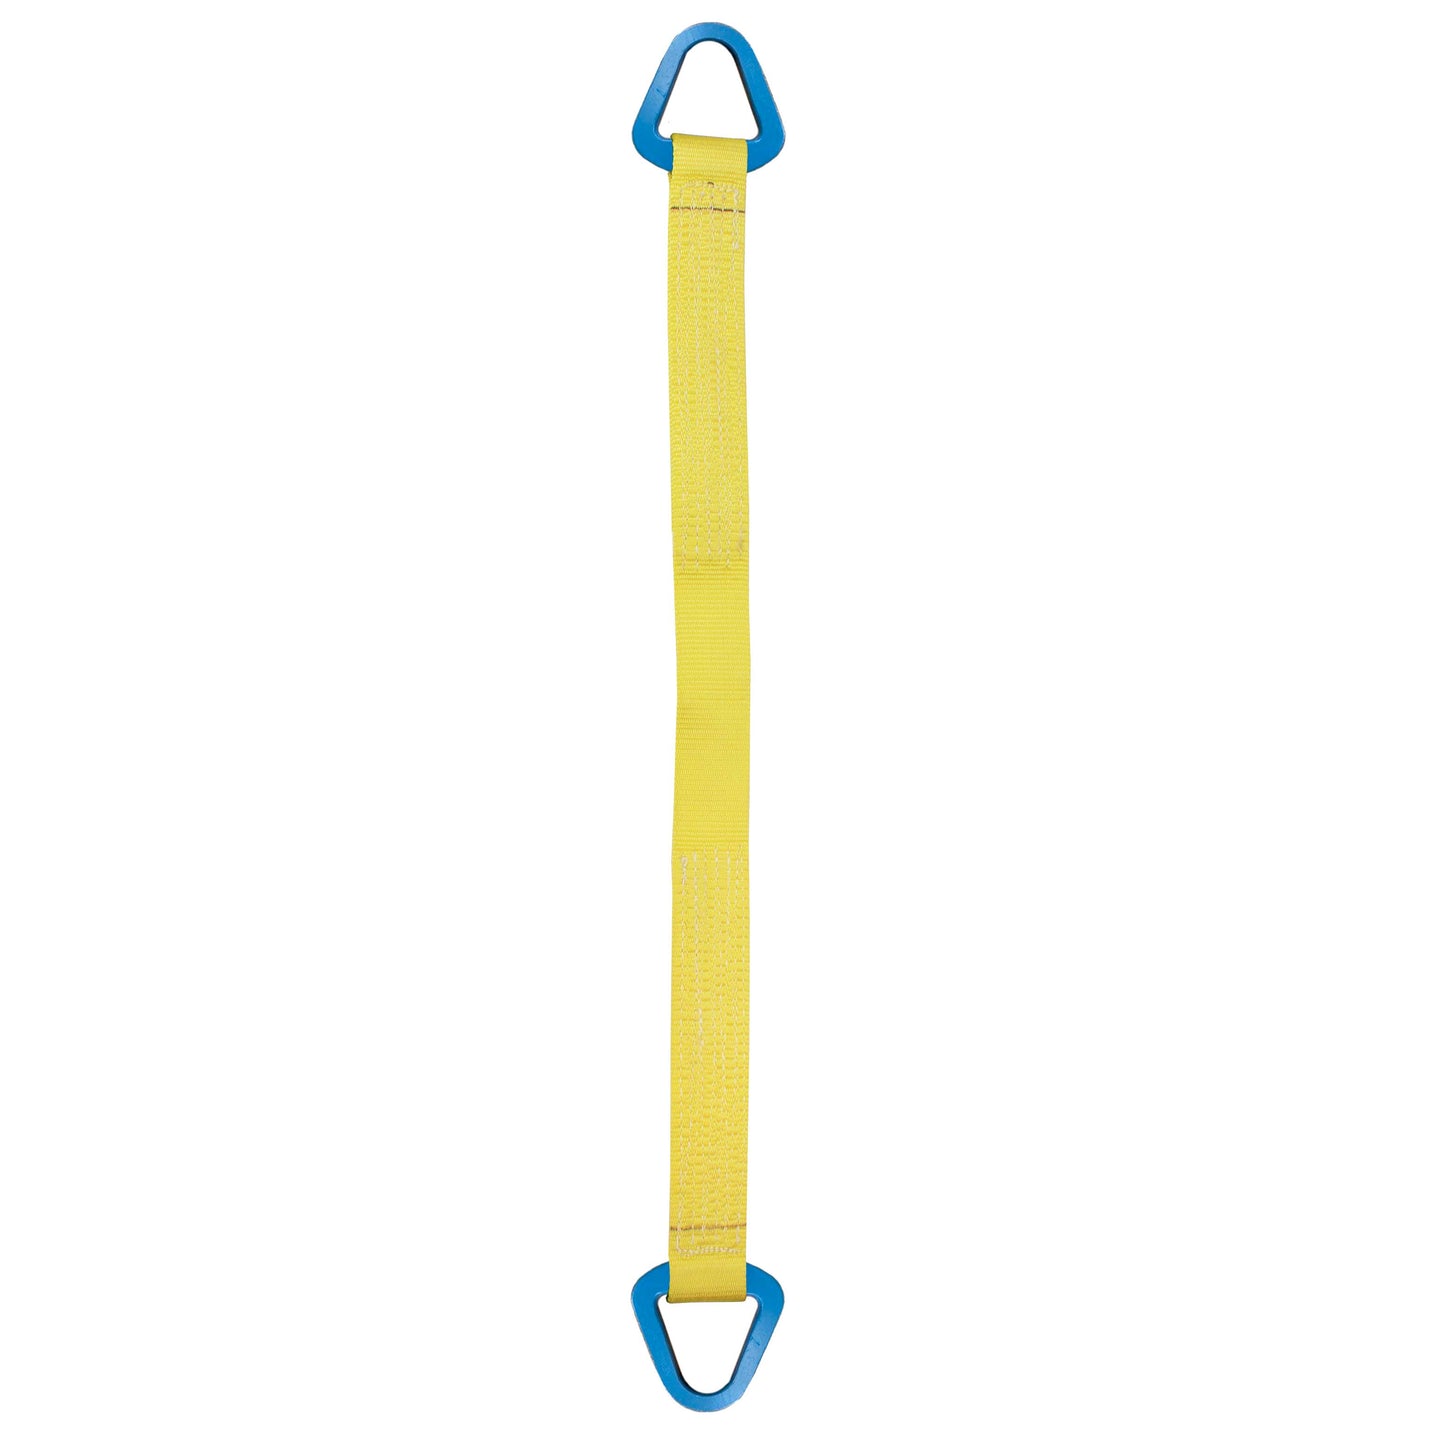 Nylon Lifting Sling Triangle 10 inch x 4 foot 2ply image 1 of 2